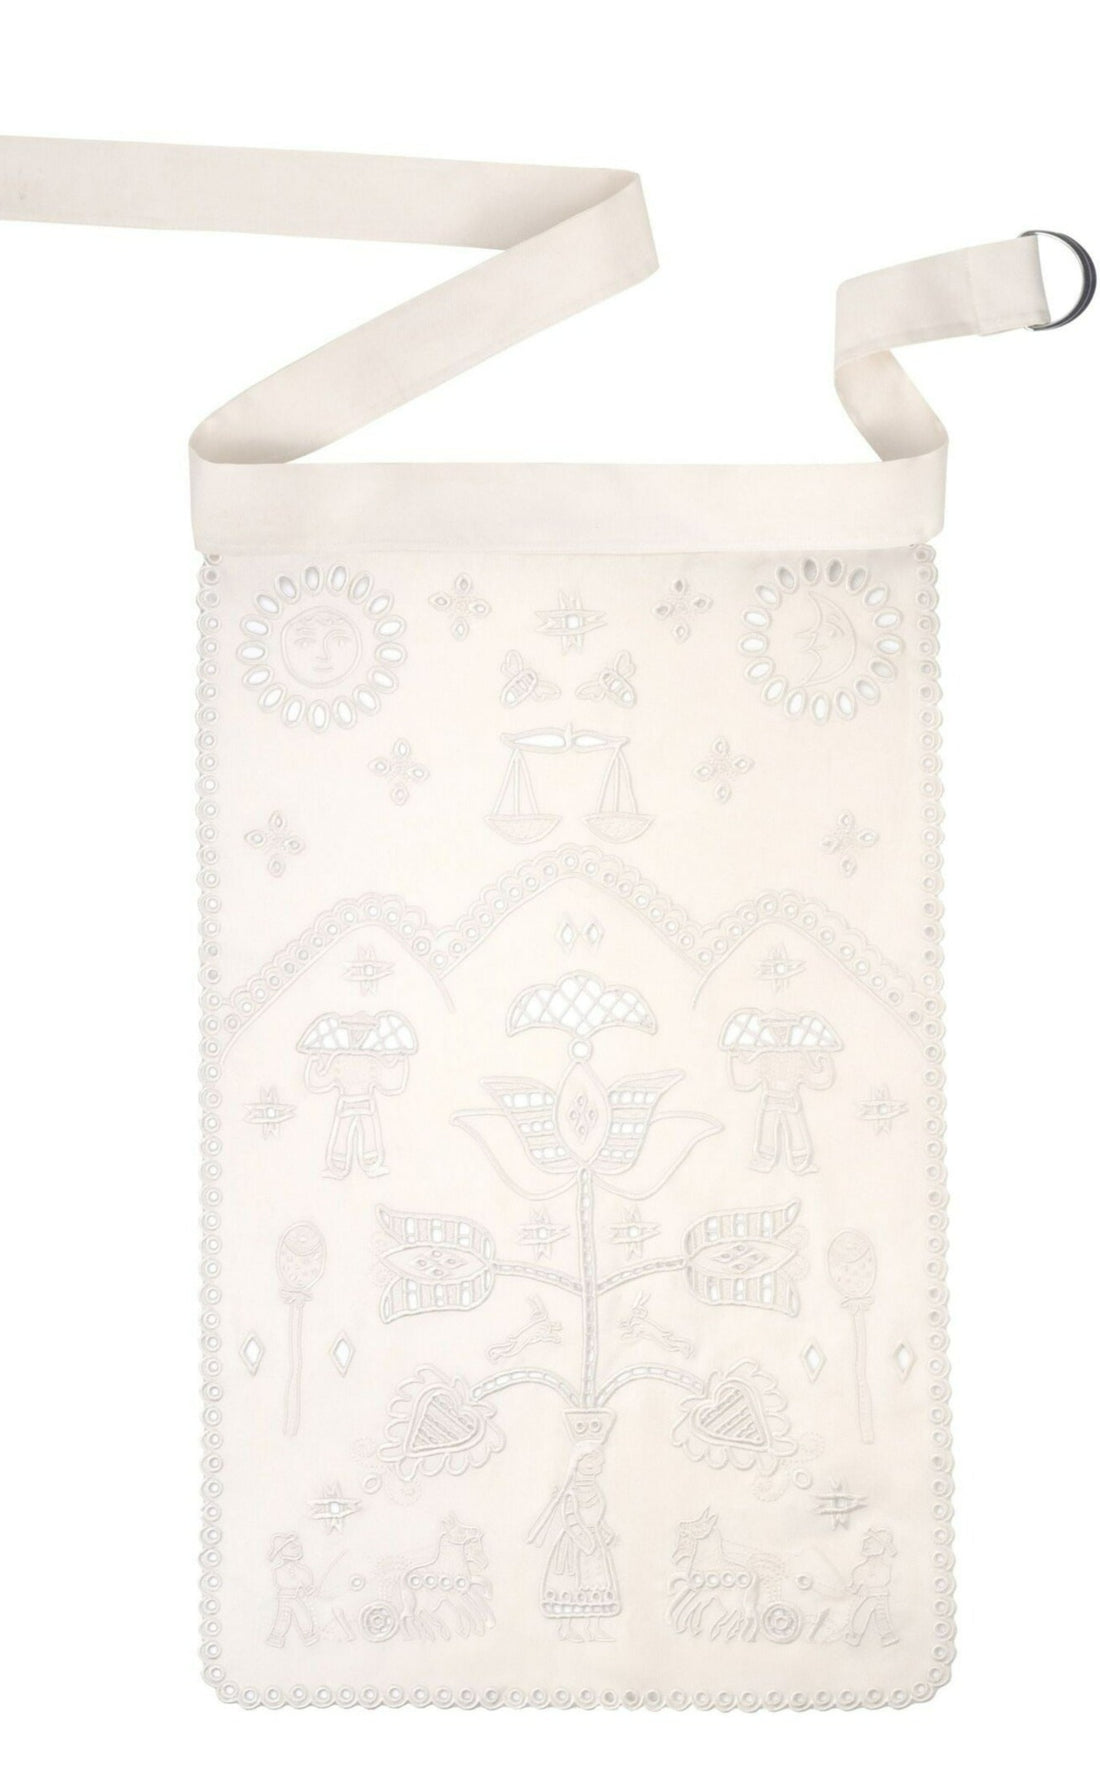 Embroidered Apron in ivory